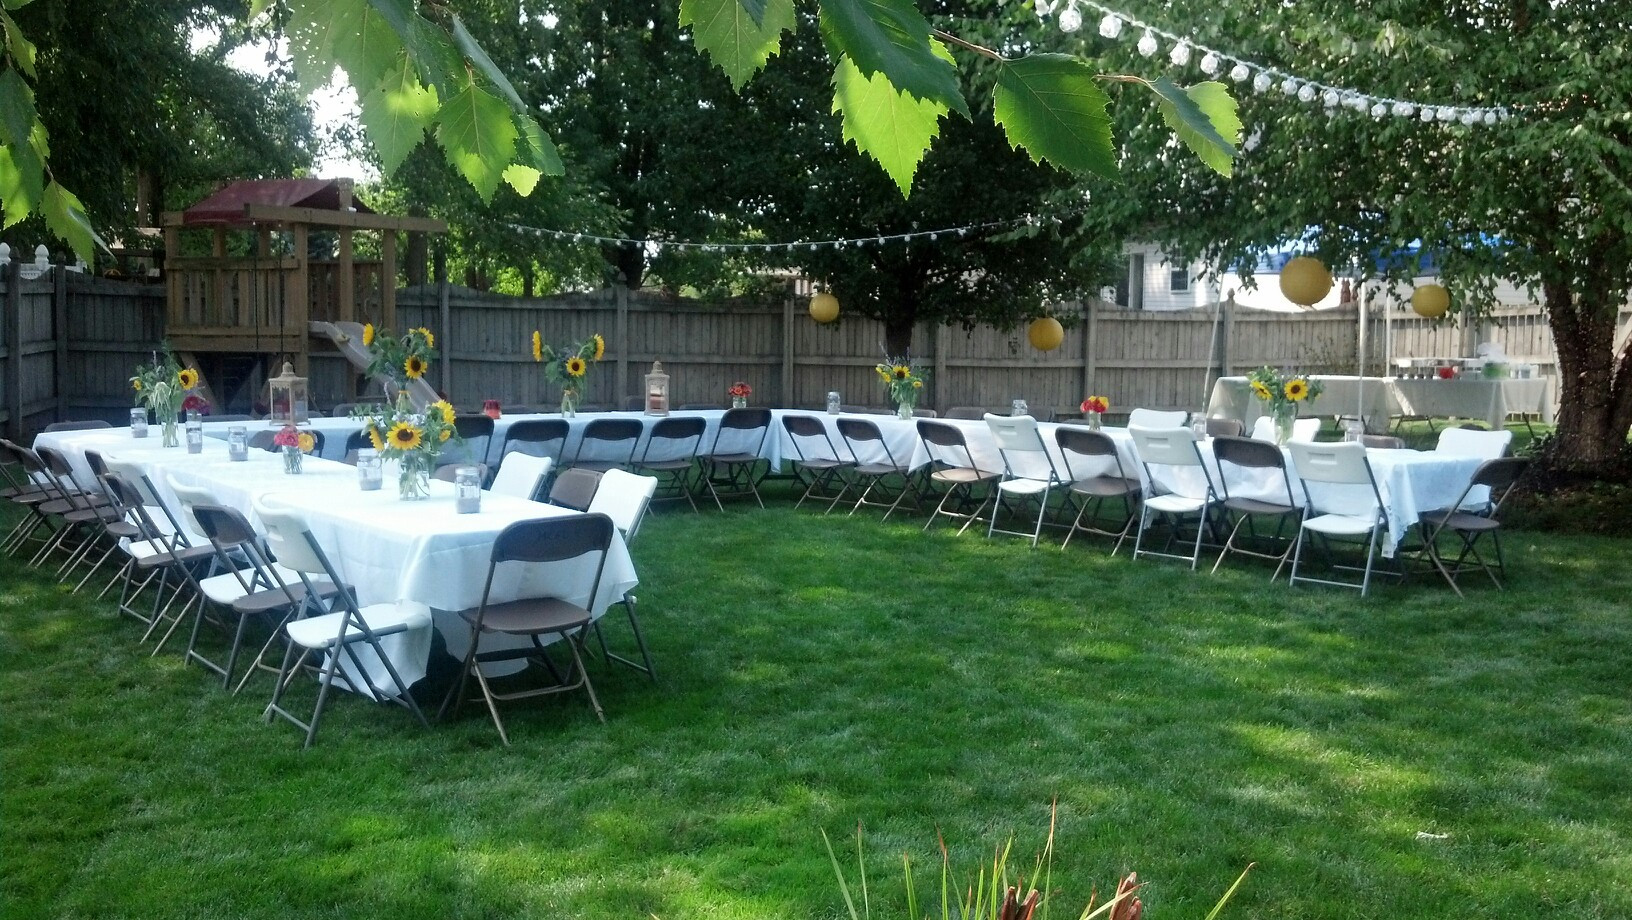 Dinner Party Decorating Ideas On A Budget
 Graduation Party Ideas on a Bud